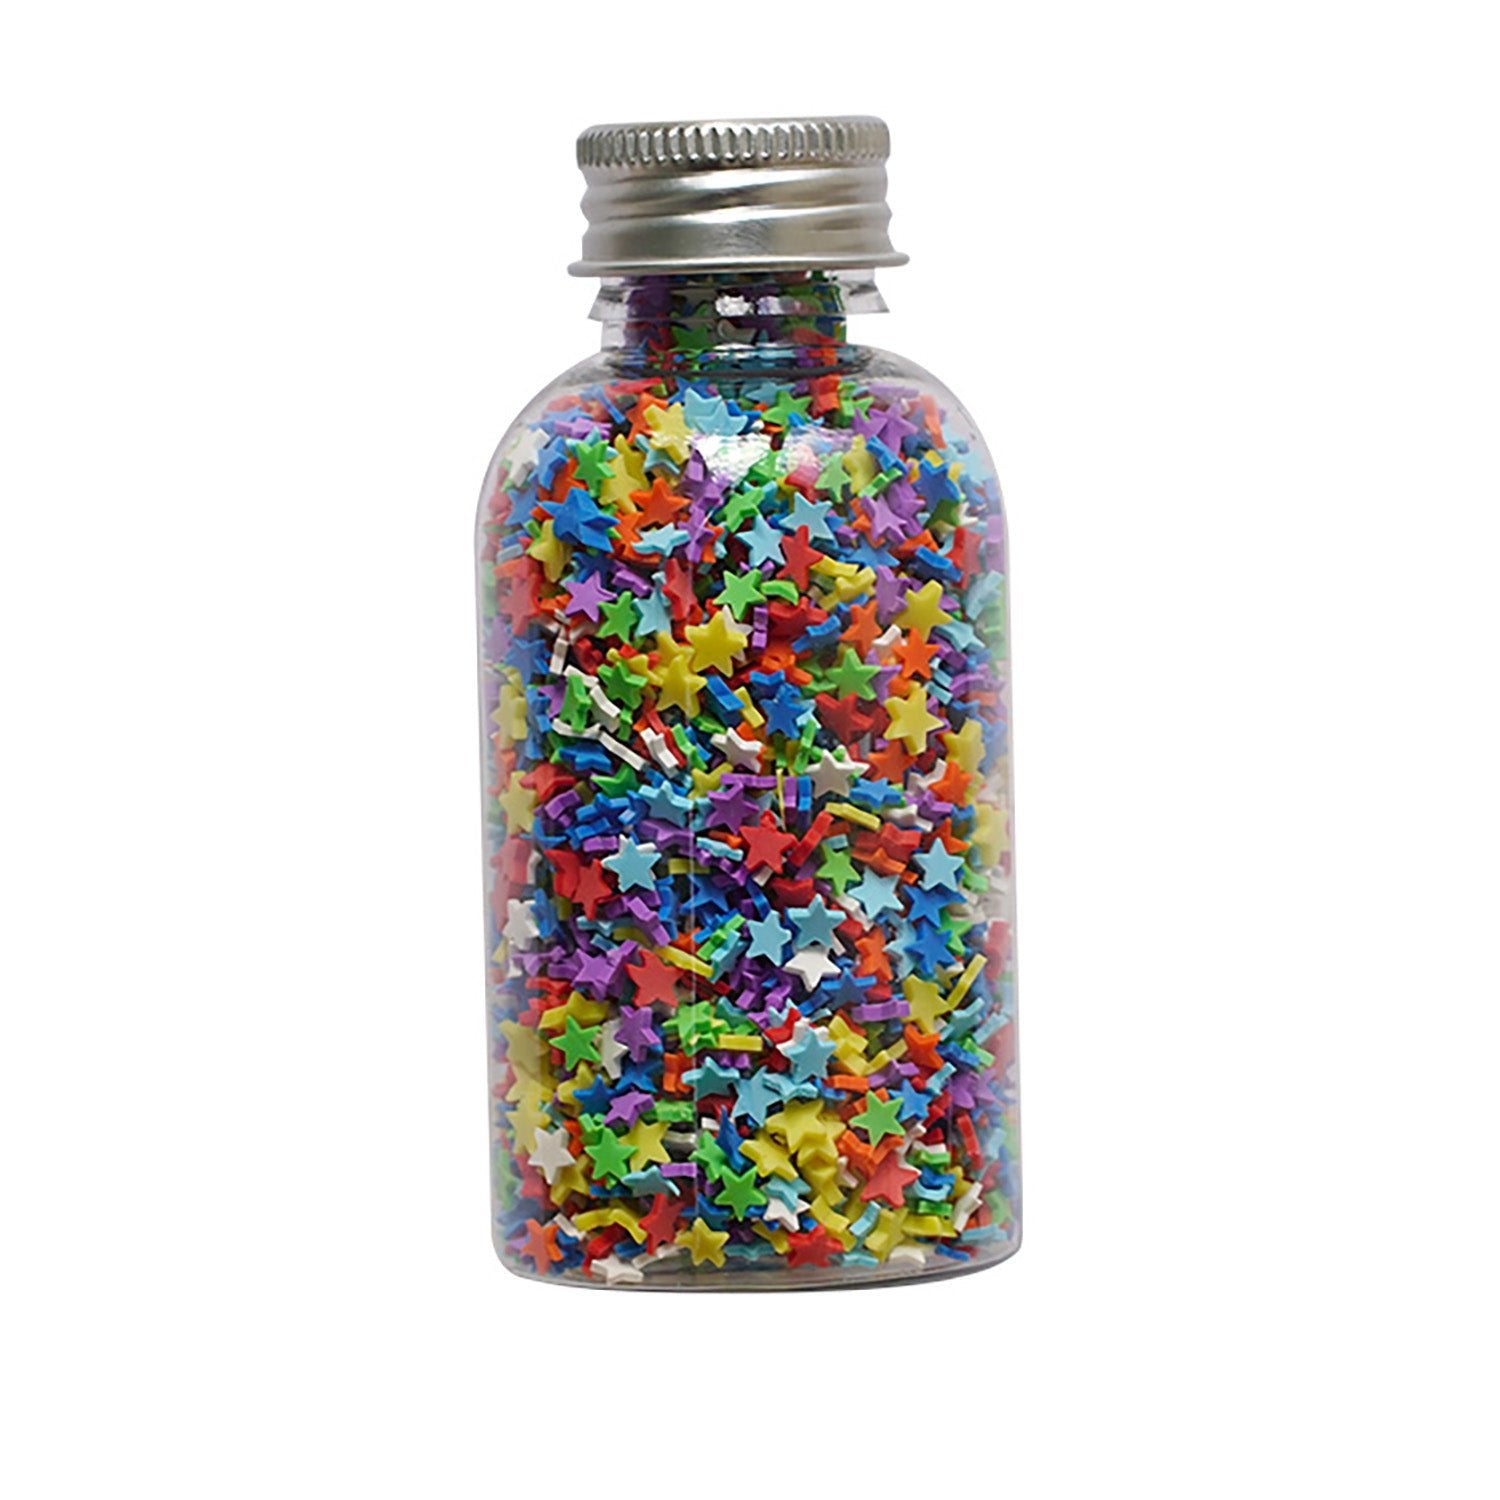 Bulk Bright Star Sprinkletz - Buttons Galore and More